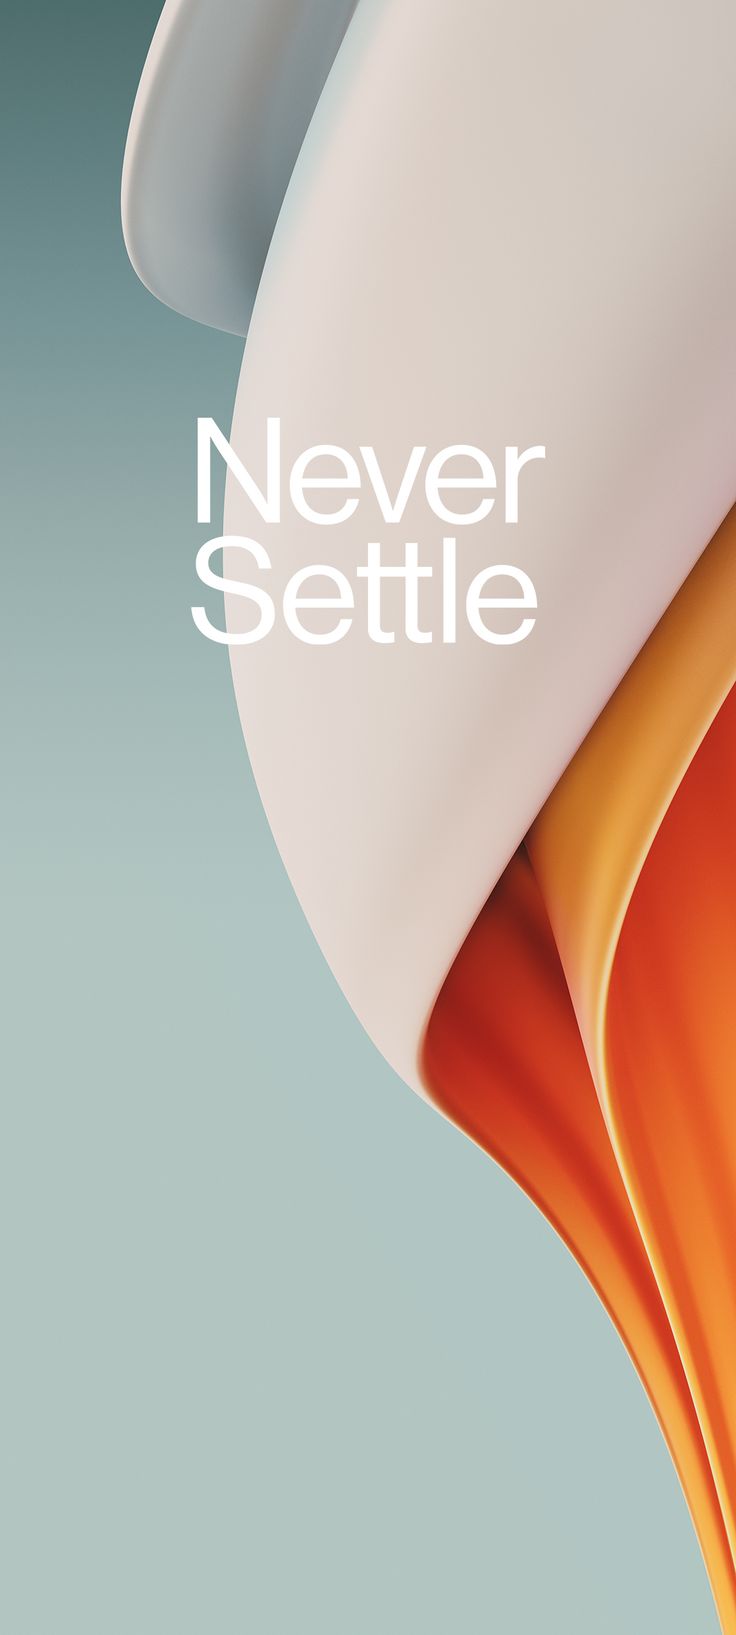 OnePlus Nord Wallpaper (YTECHB Exclusive). Never settle wallpaper, Oneplus wallpaper, Blue wallpaper iphone